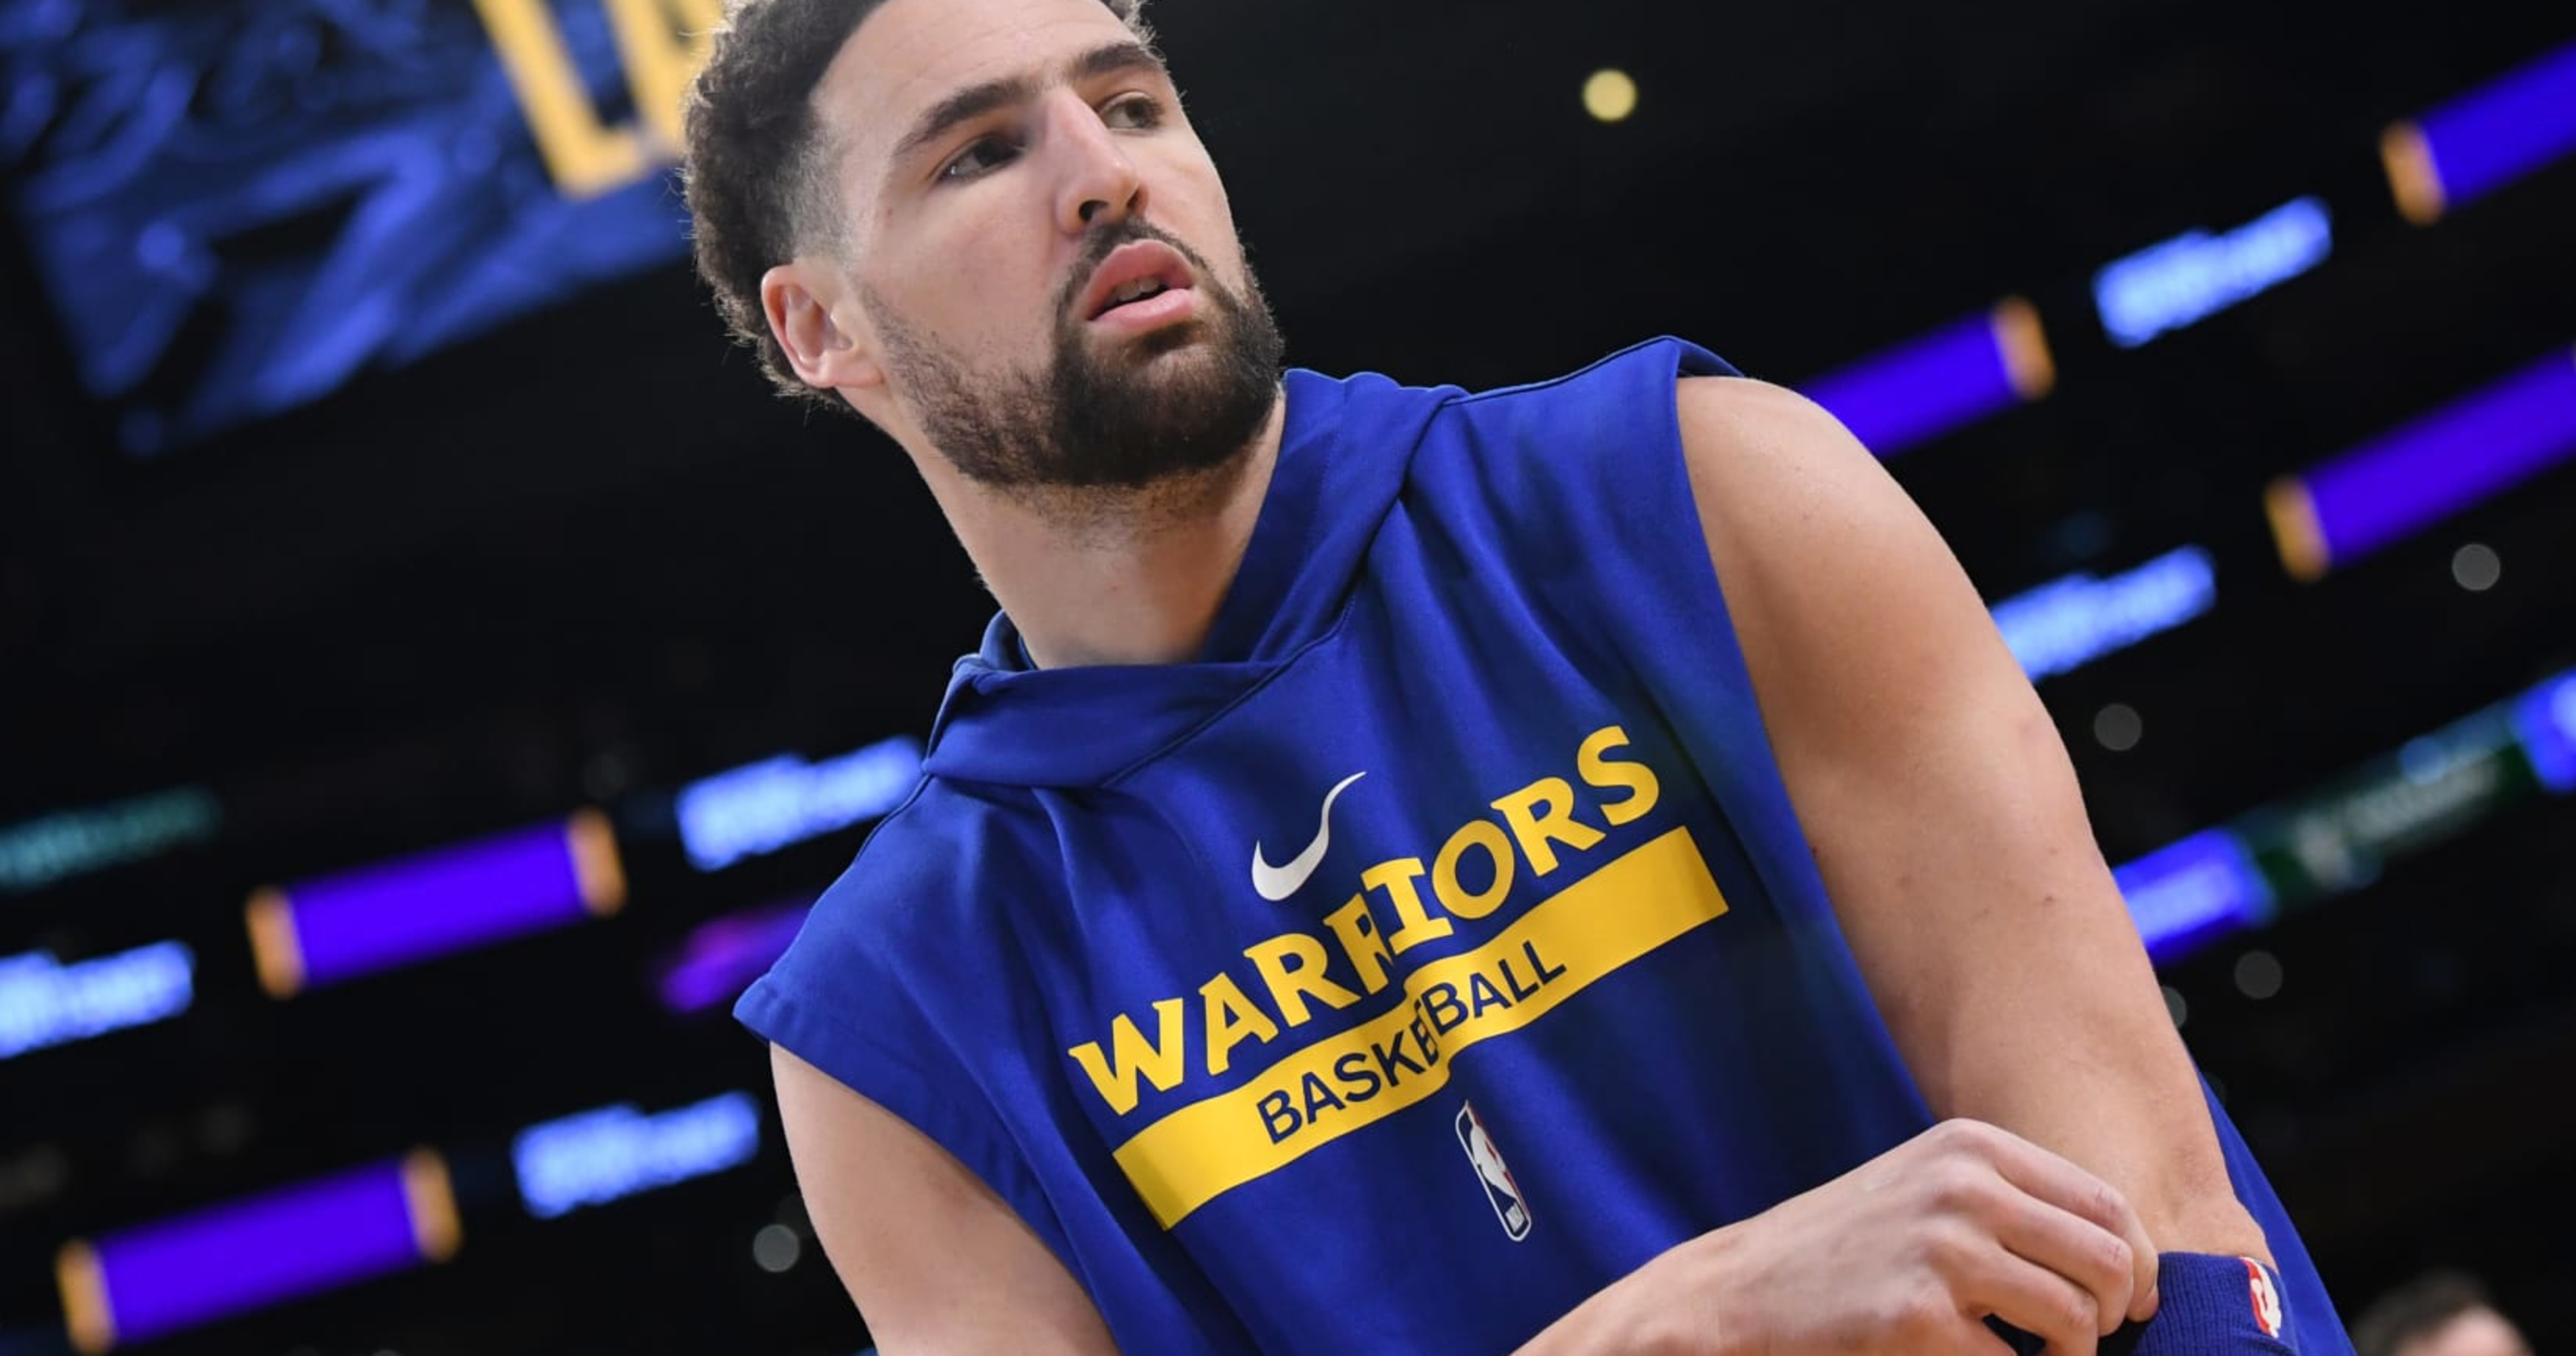 Woj: Klay Thompson, Warriors Have Made 'Absolutely No Progress' in